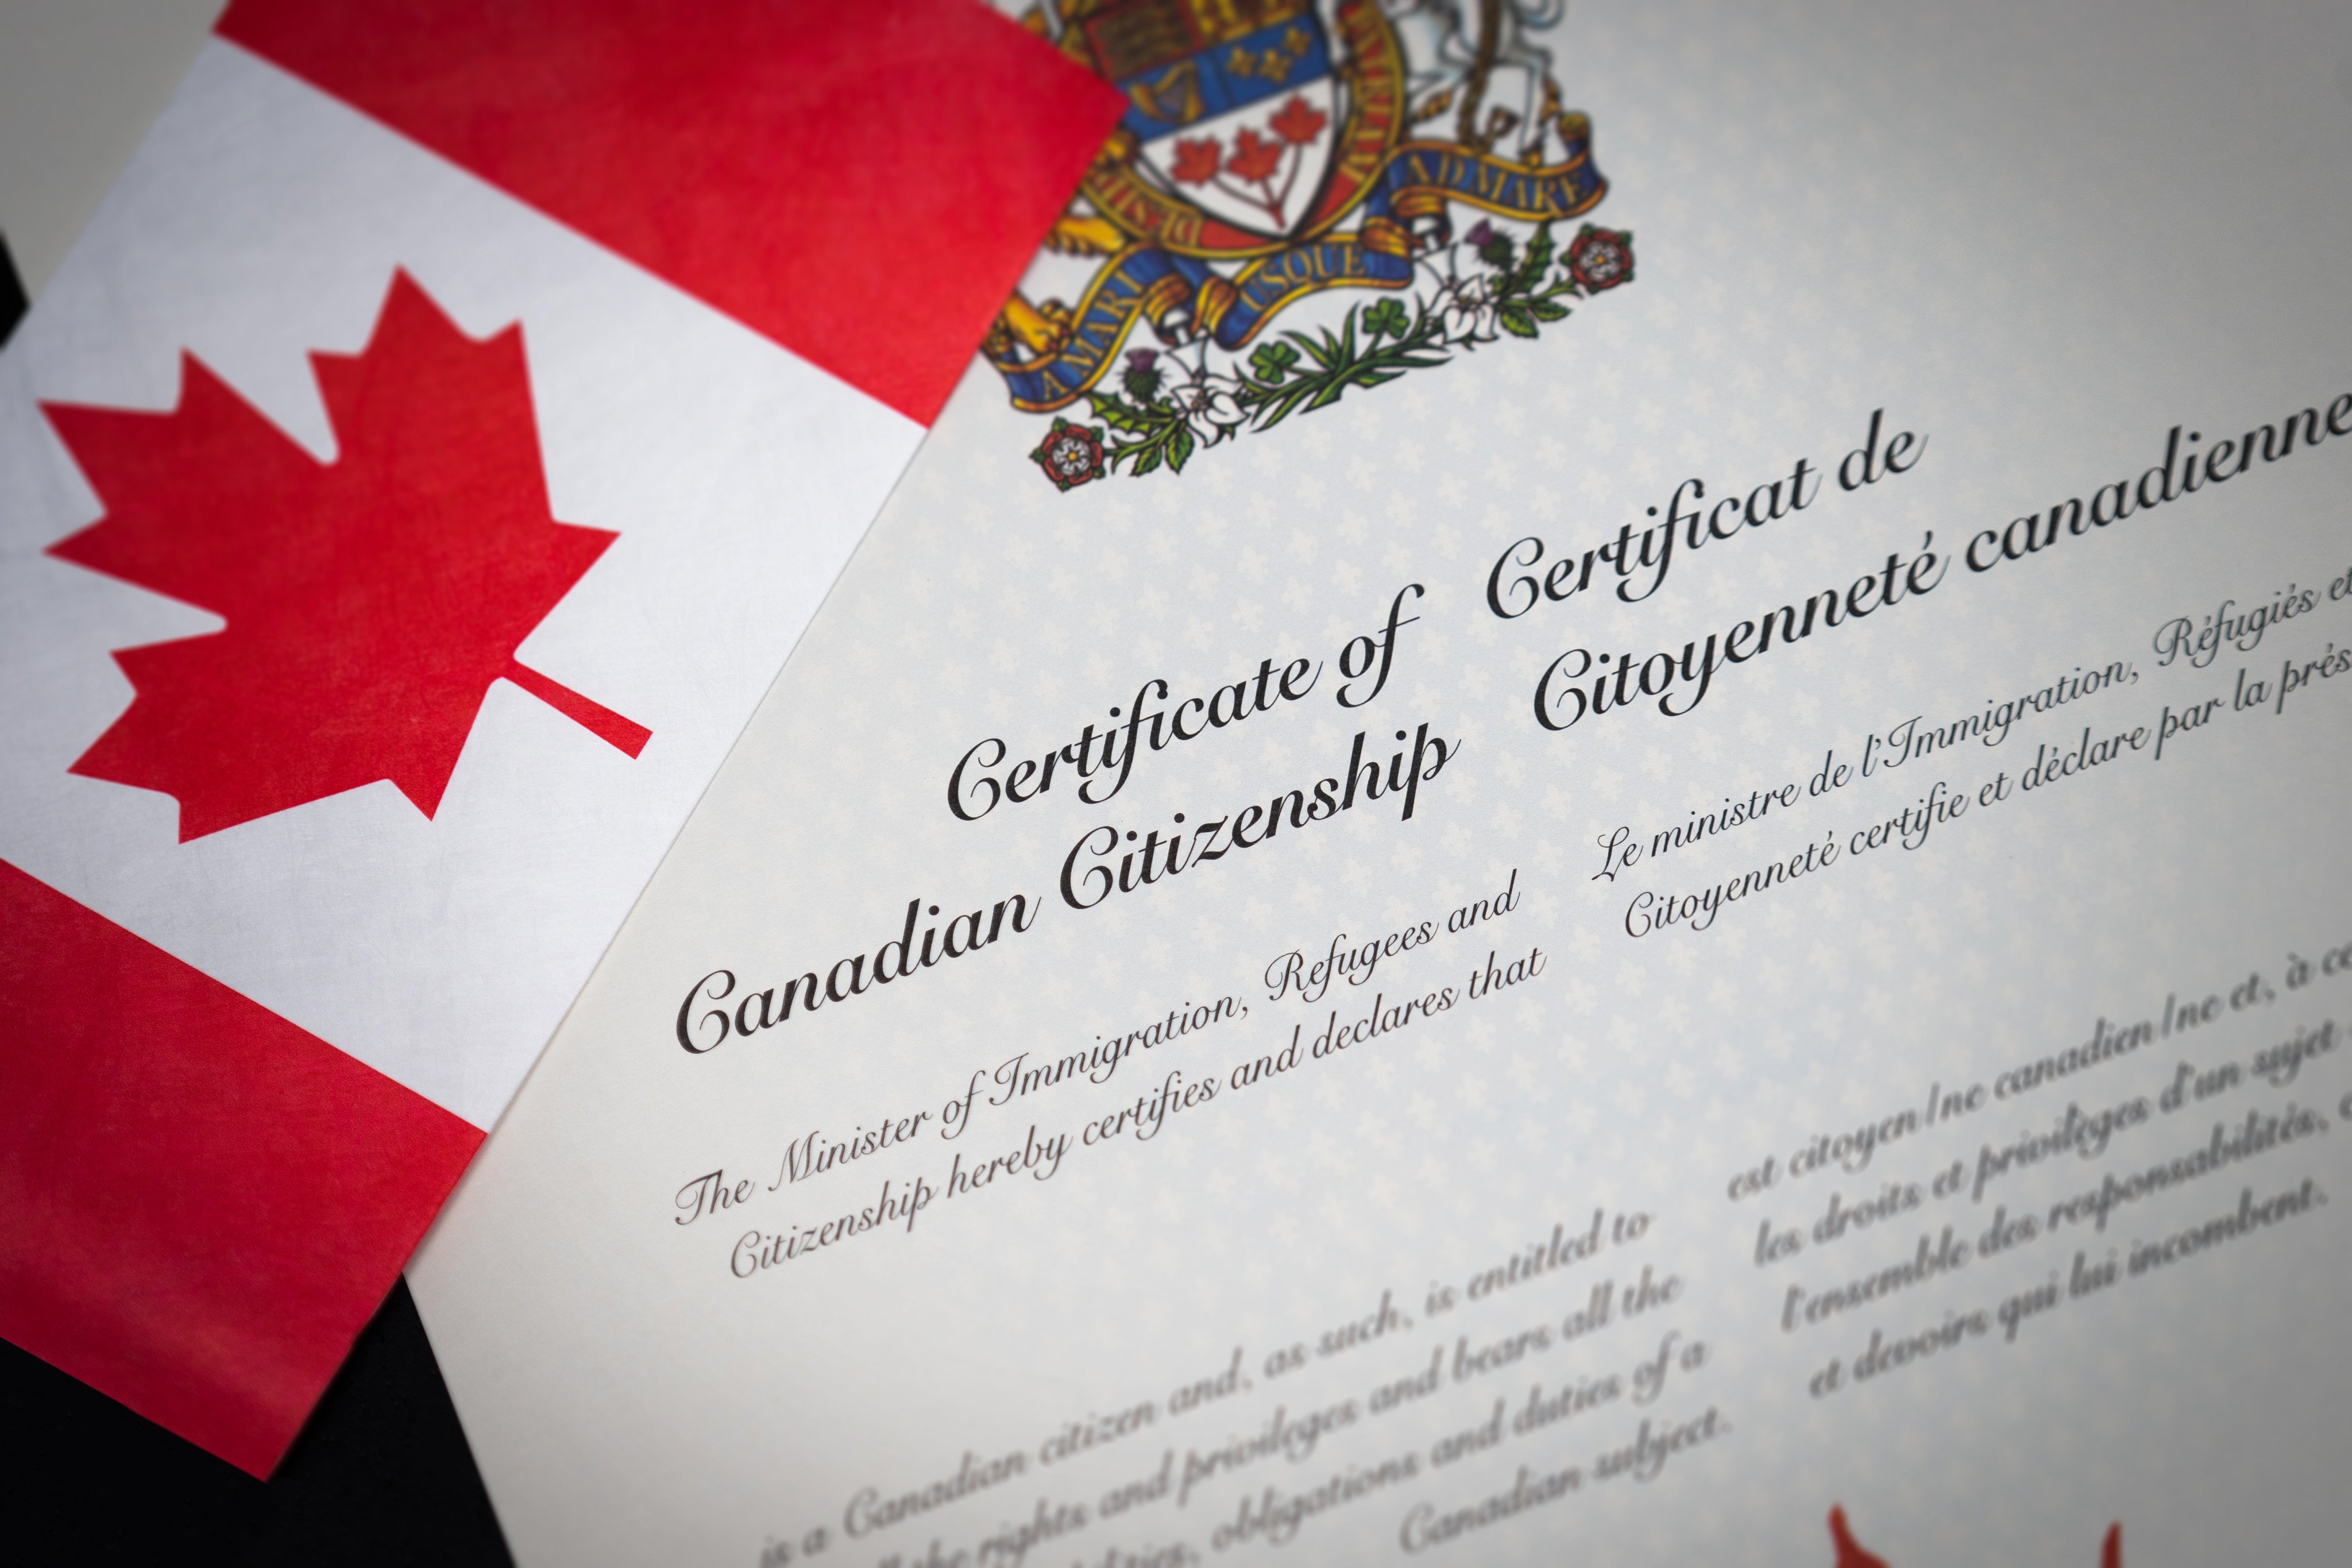 Vancouver woman Caixuan Qin claimed that her Canadian citizenship application has languished for more than 29 months, ‘over 2.5 times longer than the process requires’. File photo: Shutterstock